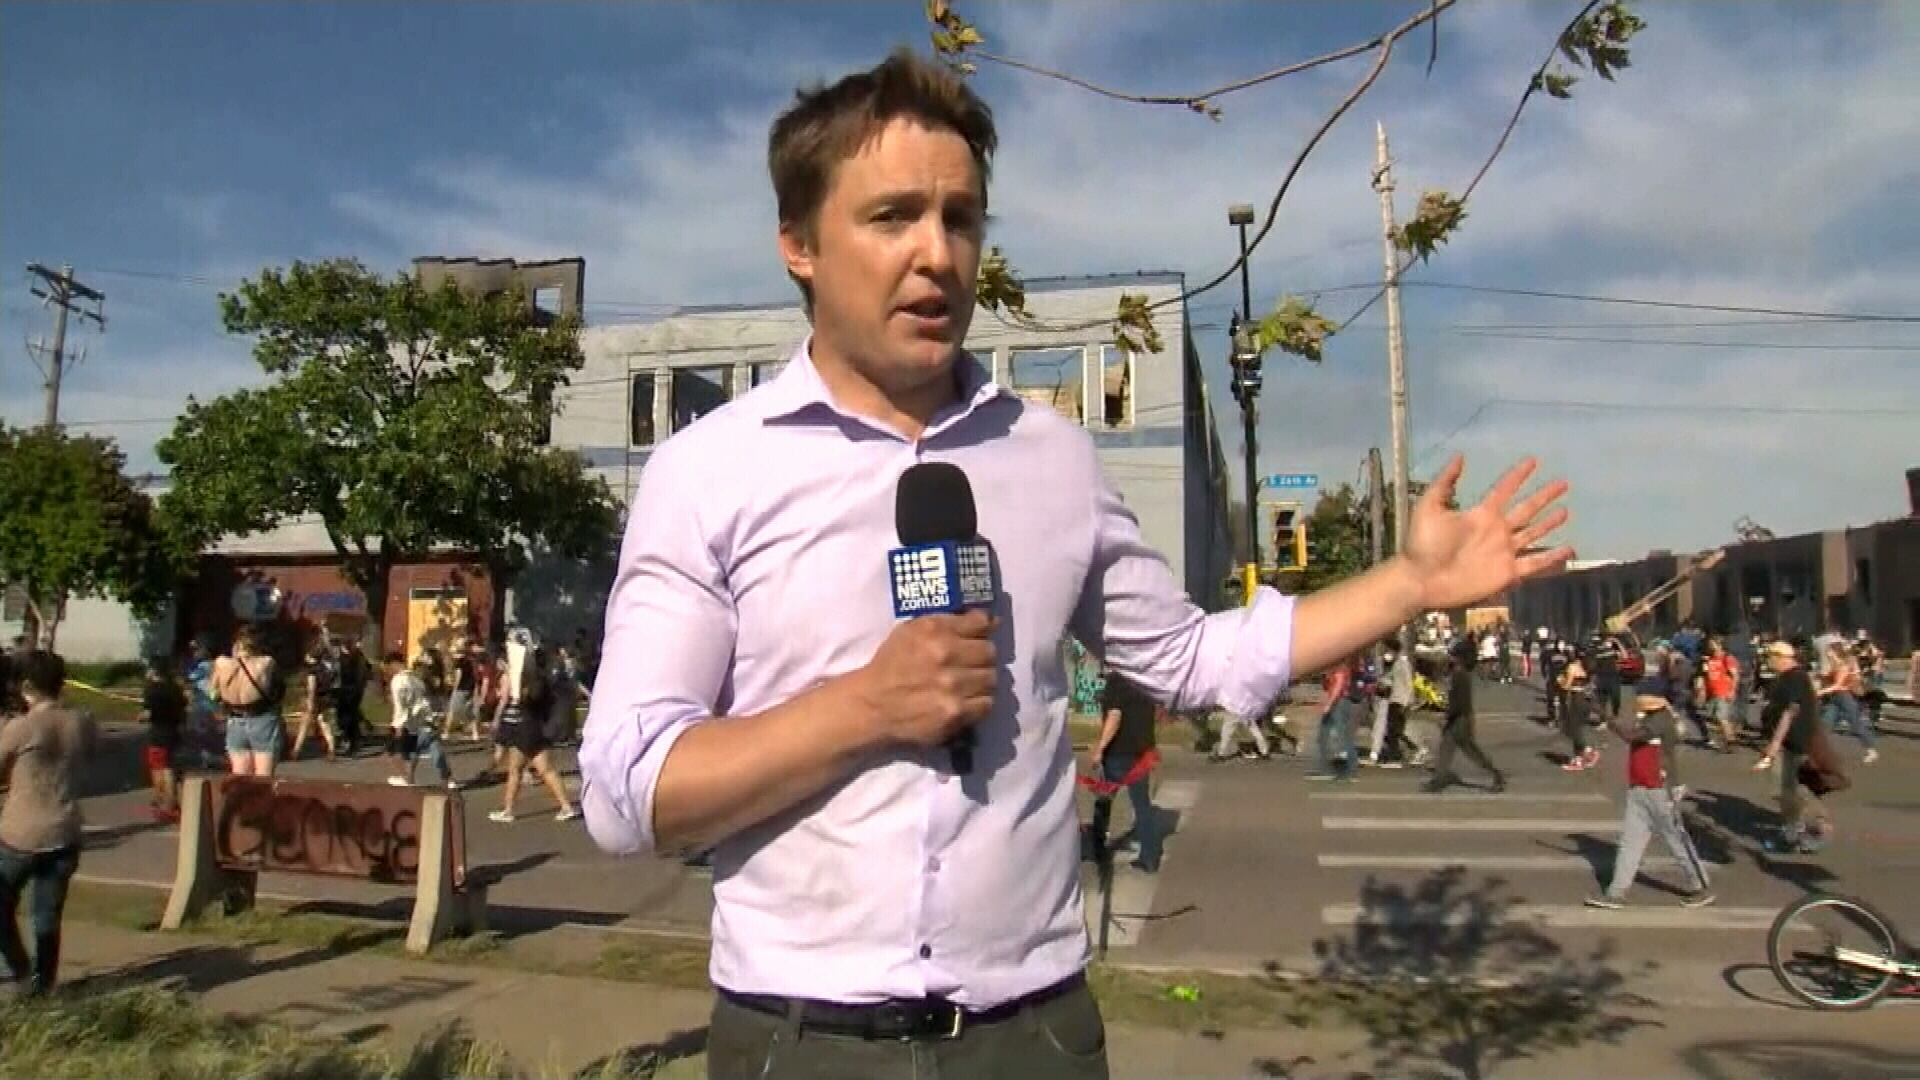 9News reporter Tim Arvier in Minneapolis at violent clashes erupted between protesters and police.